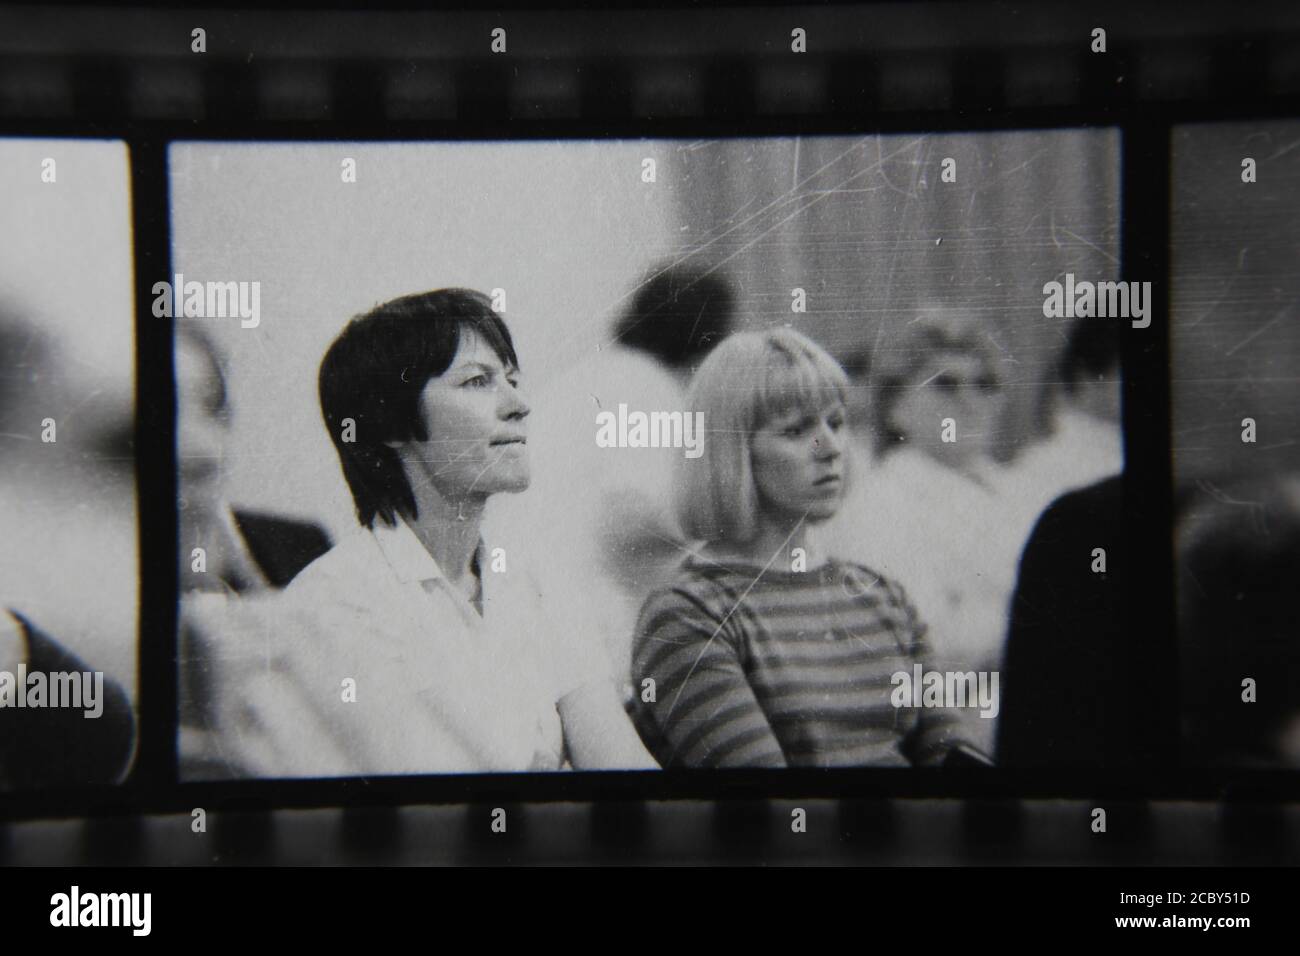 Fine 1970s vintage black and white photography of two women sitting in the audience paying attention to the entertainment. Stock Photo